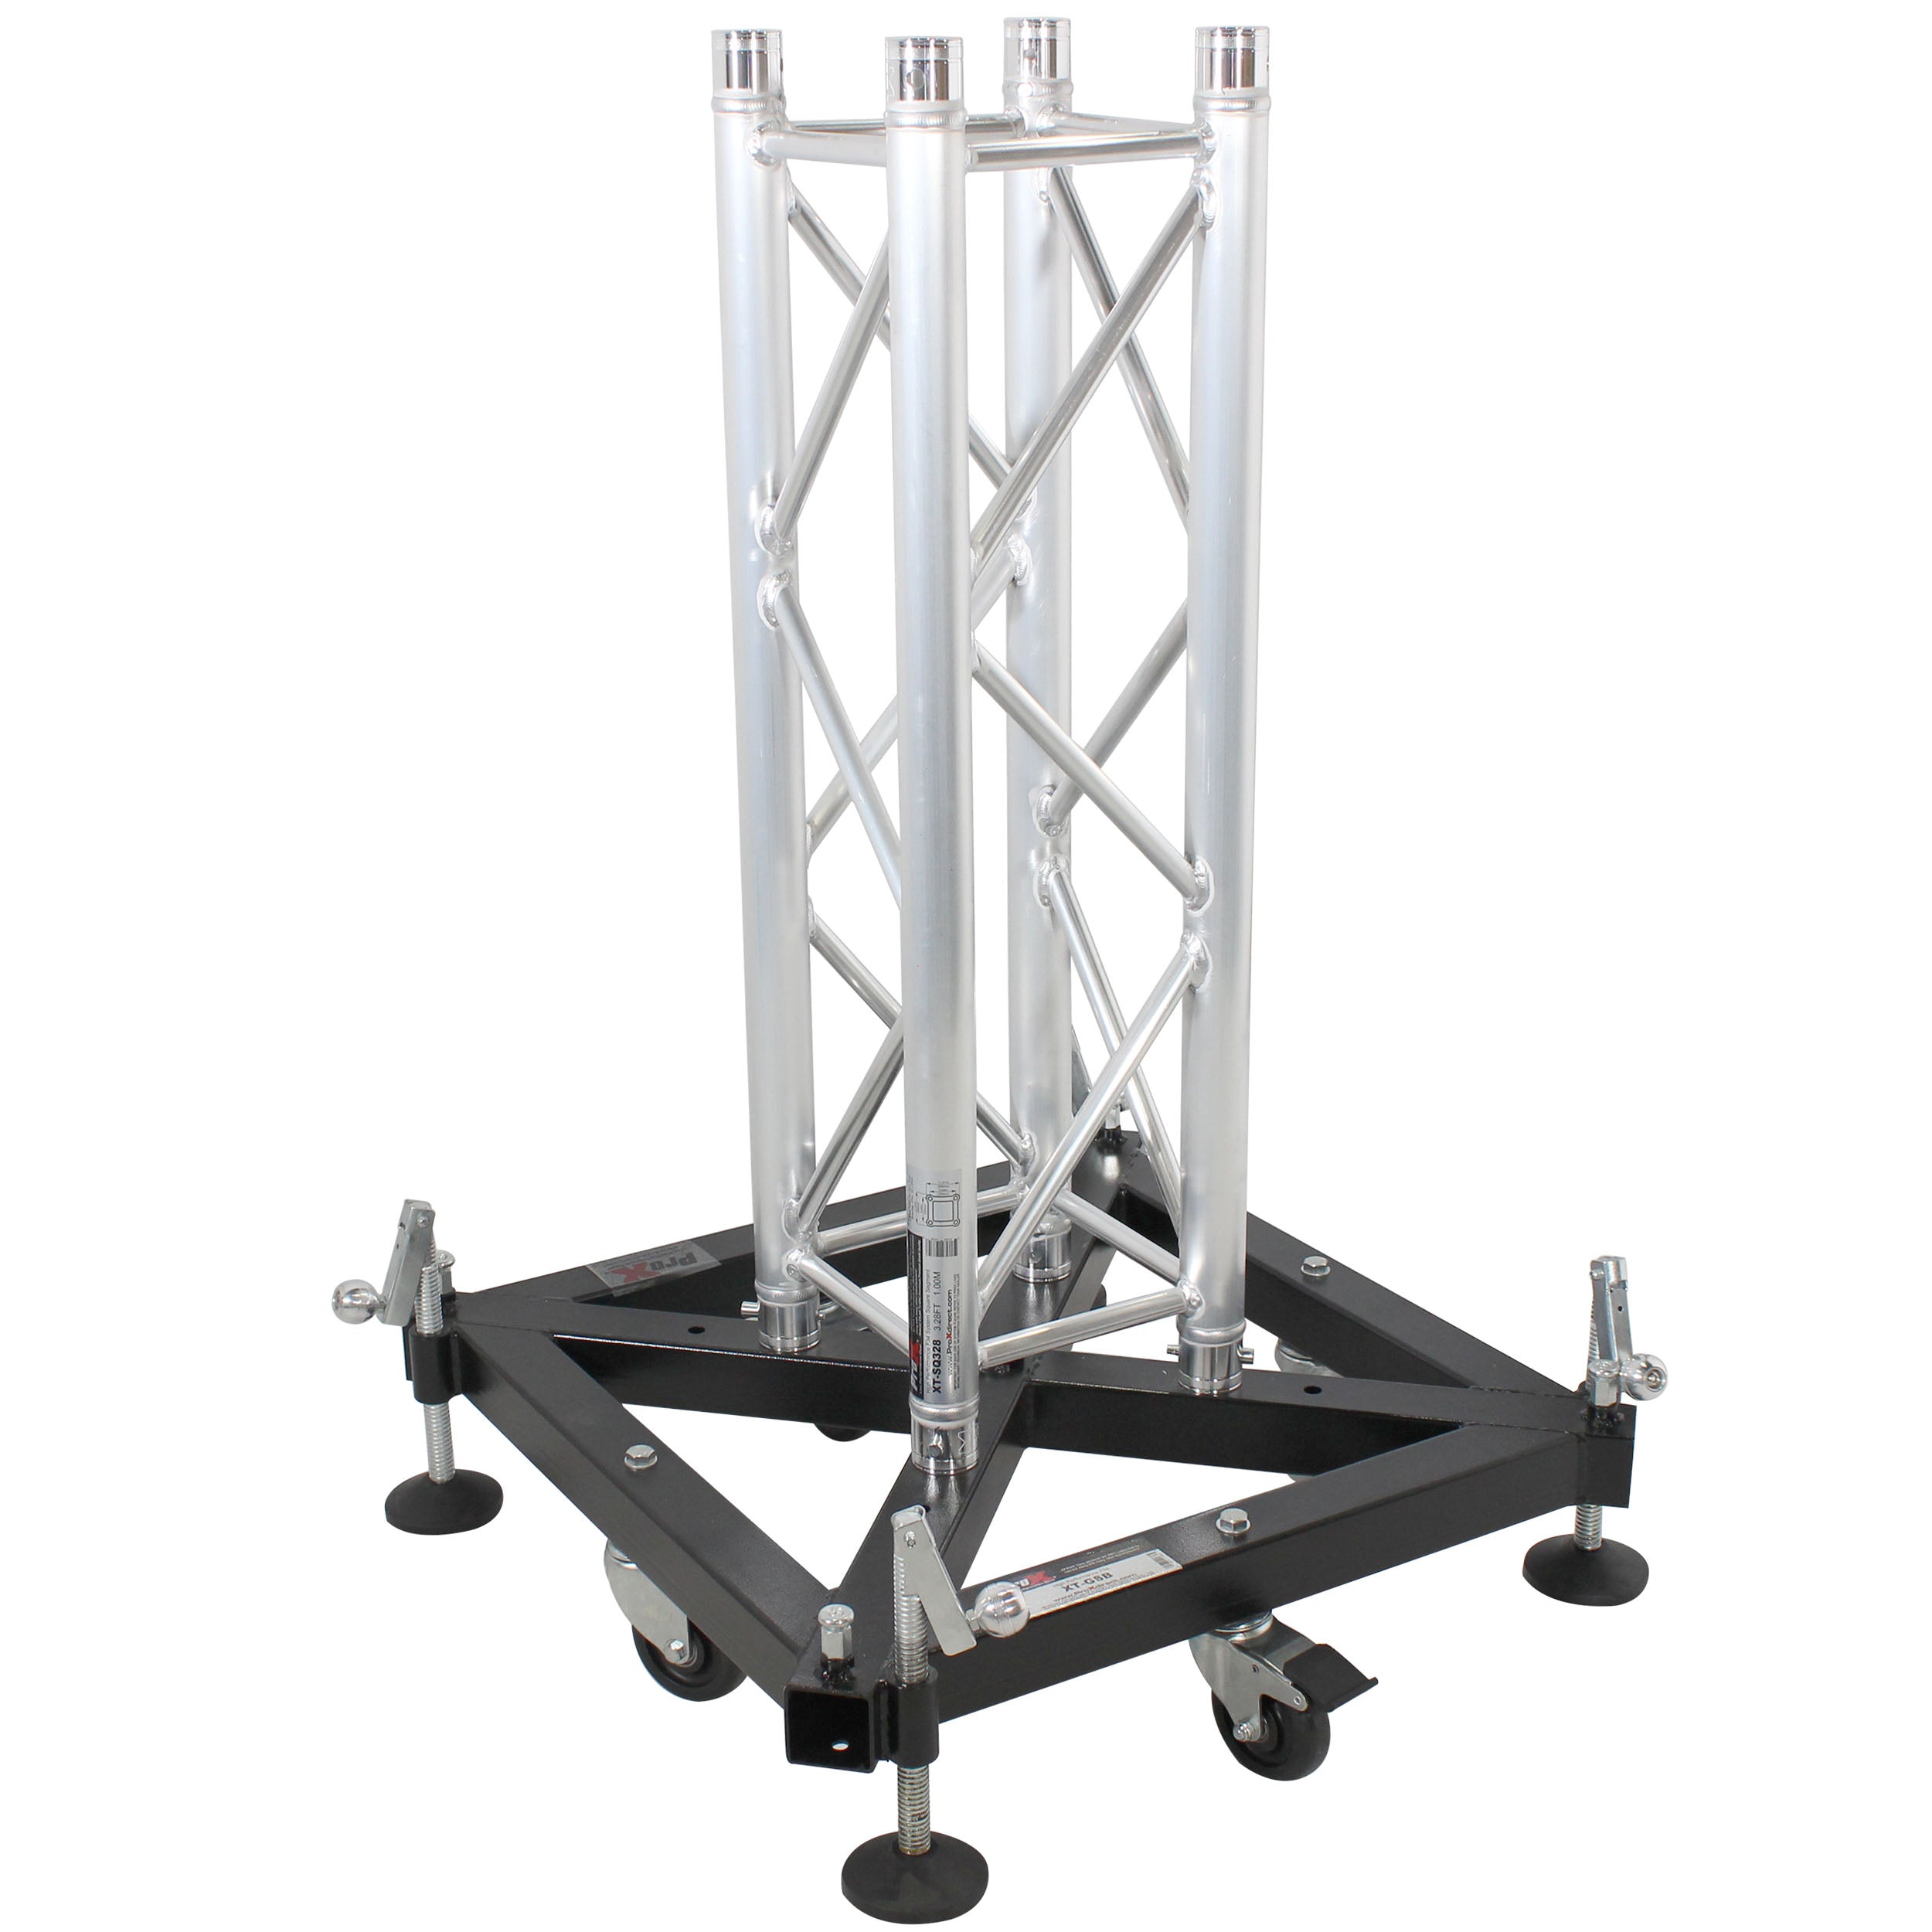 Pro X Truss Tower Stage Roofing System Package -Top Block | Hinges | Base | Outriggers and 3.28 Ft. 2 mm Wall Truss Segment XTP-GSBPACK3